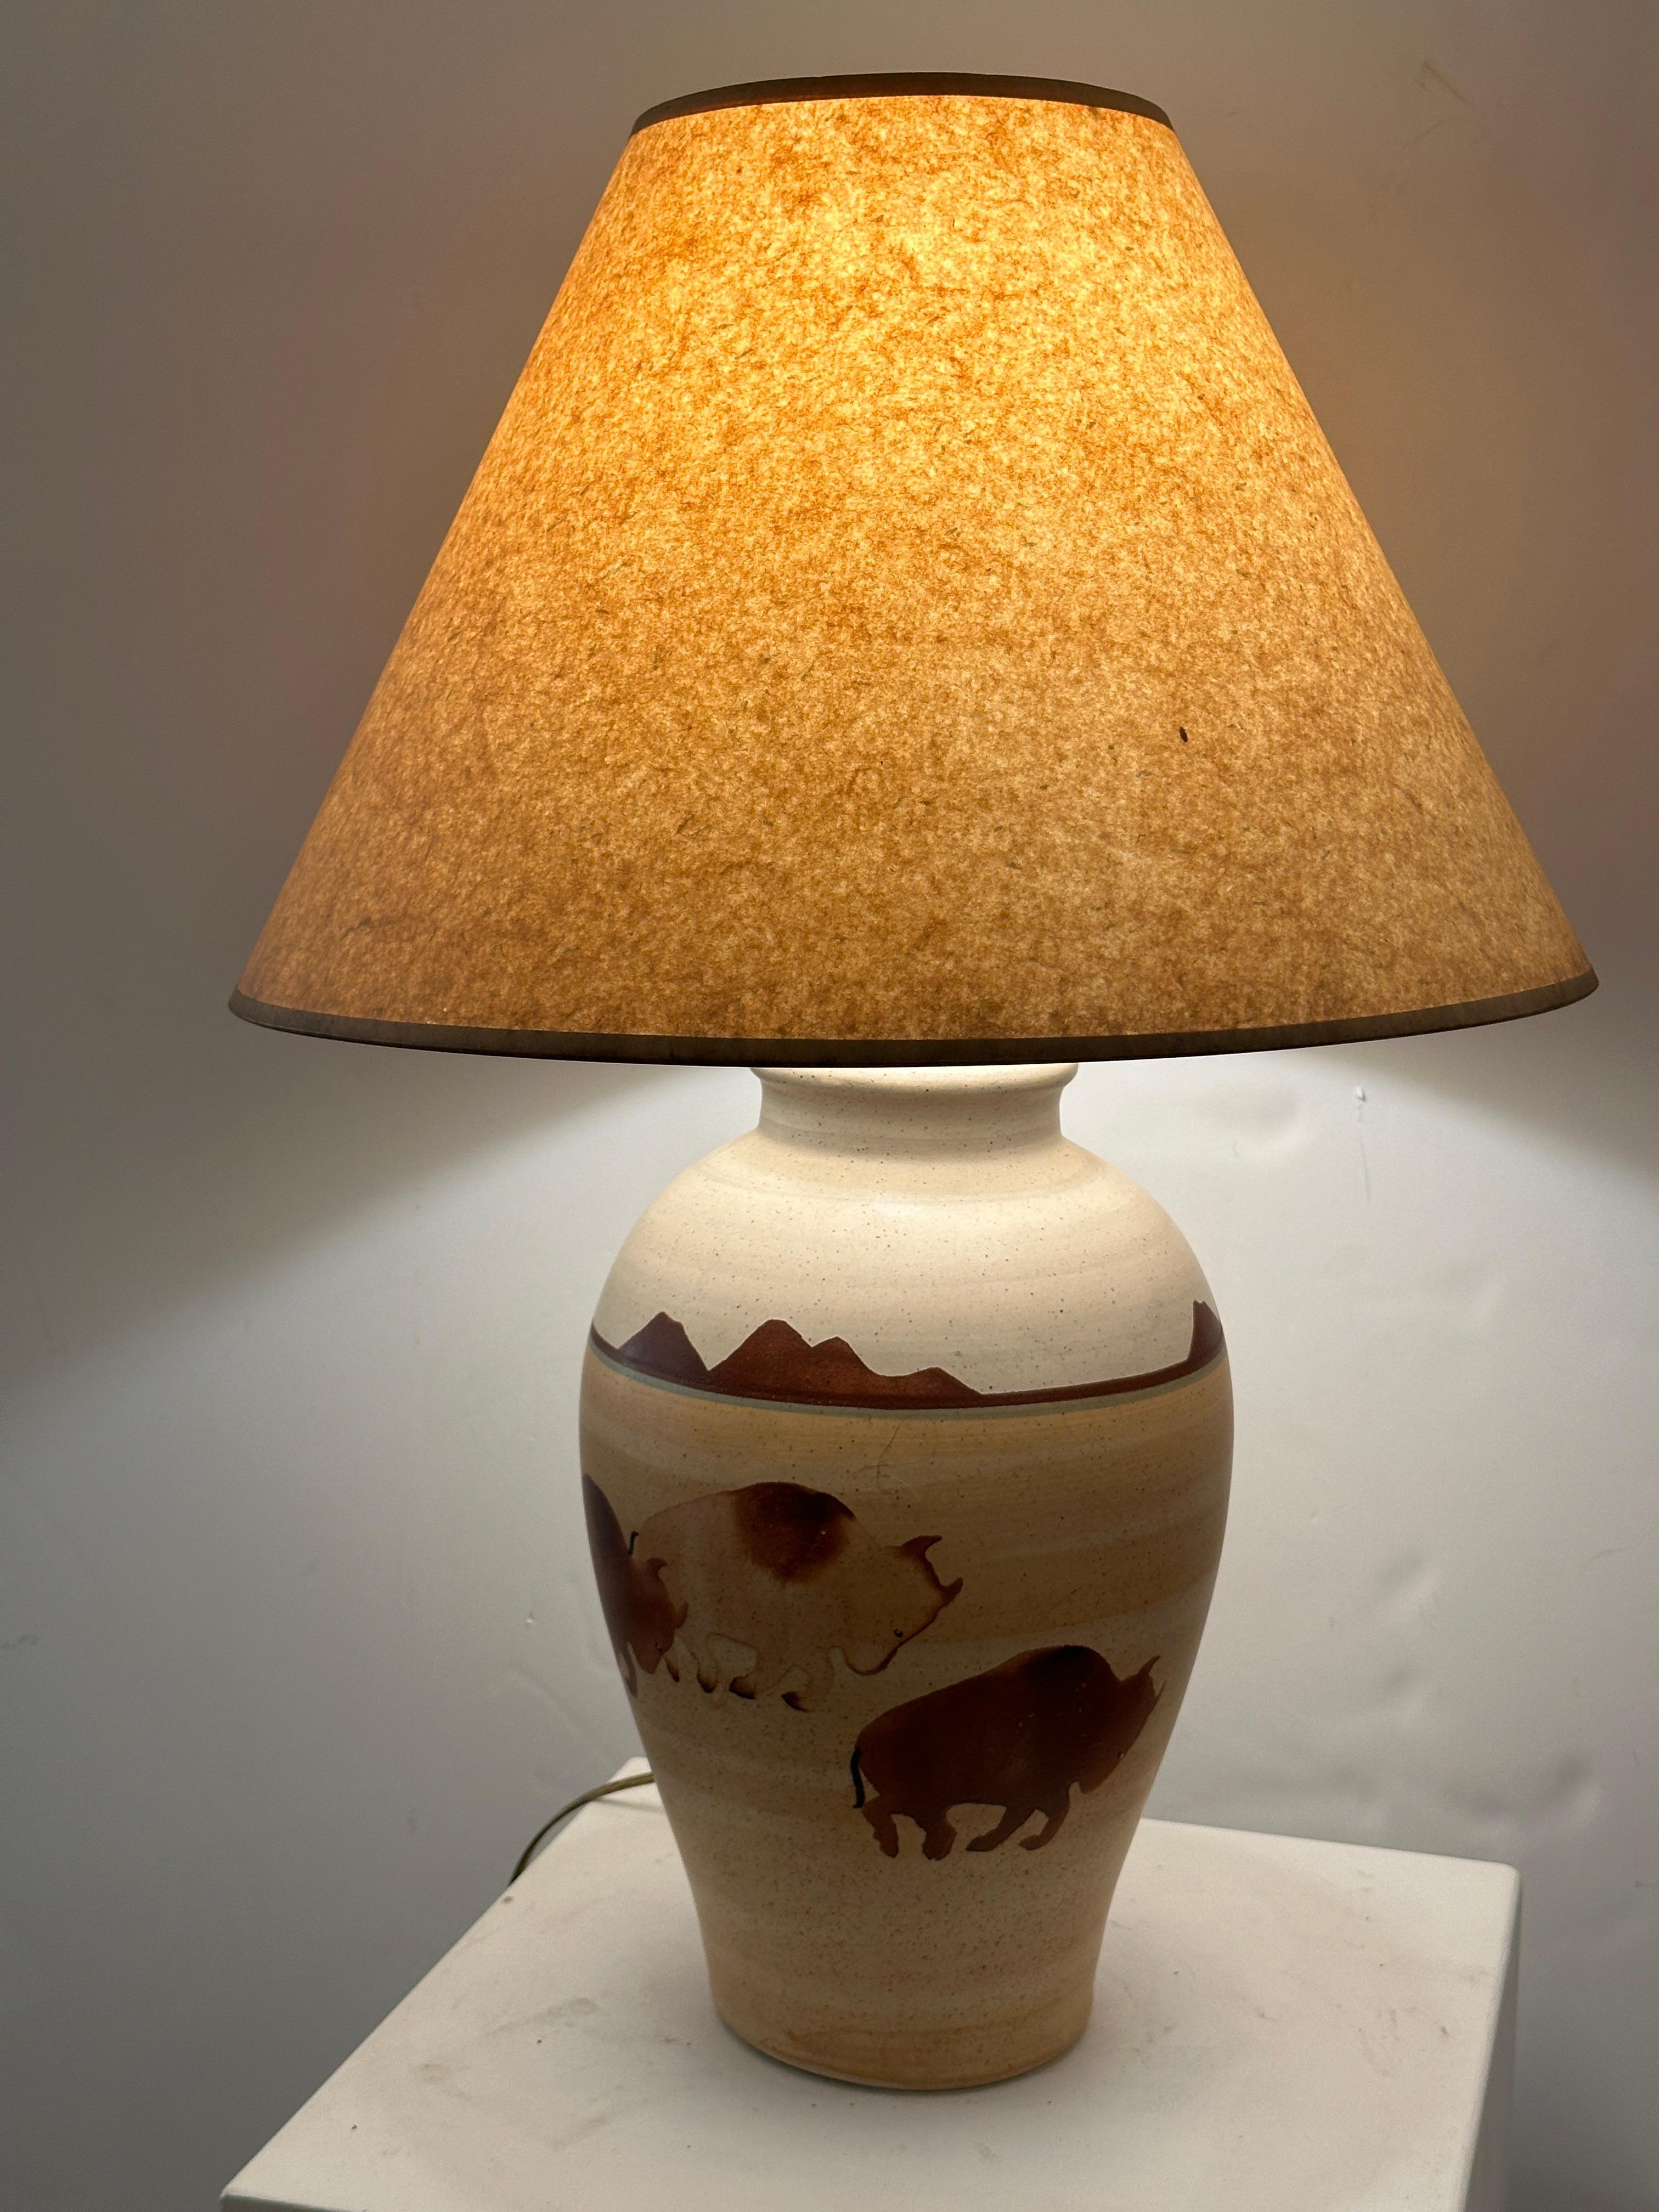 This vintage ceramic lamp by California Ceramic Designers Inc. features a Southwestern landscape around the circumference with three nicely detailed stampeding bison centered in the front. The scenery is reminiscent of the familiar representations